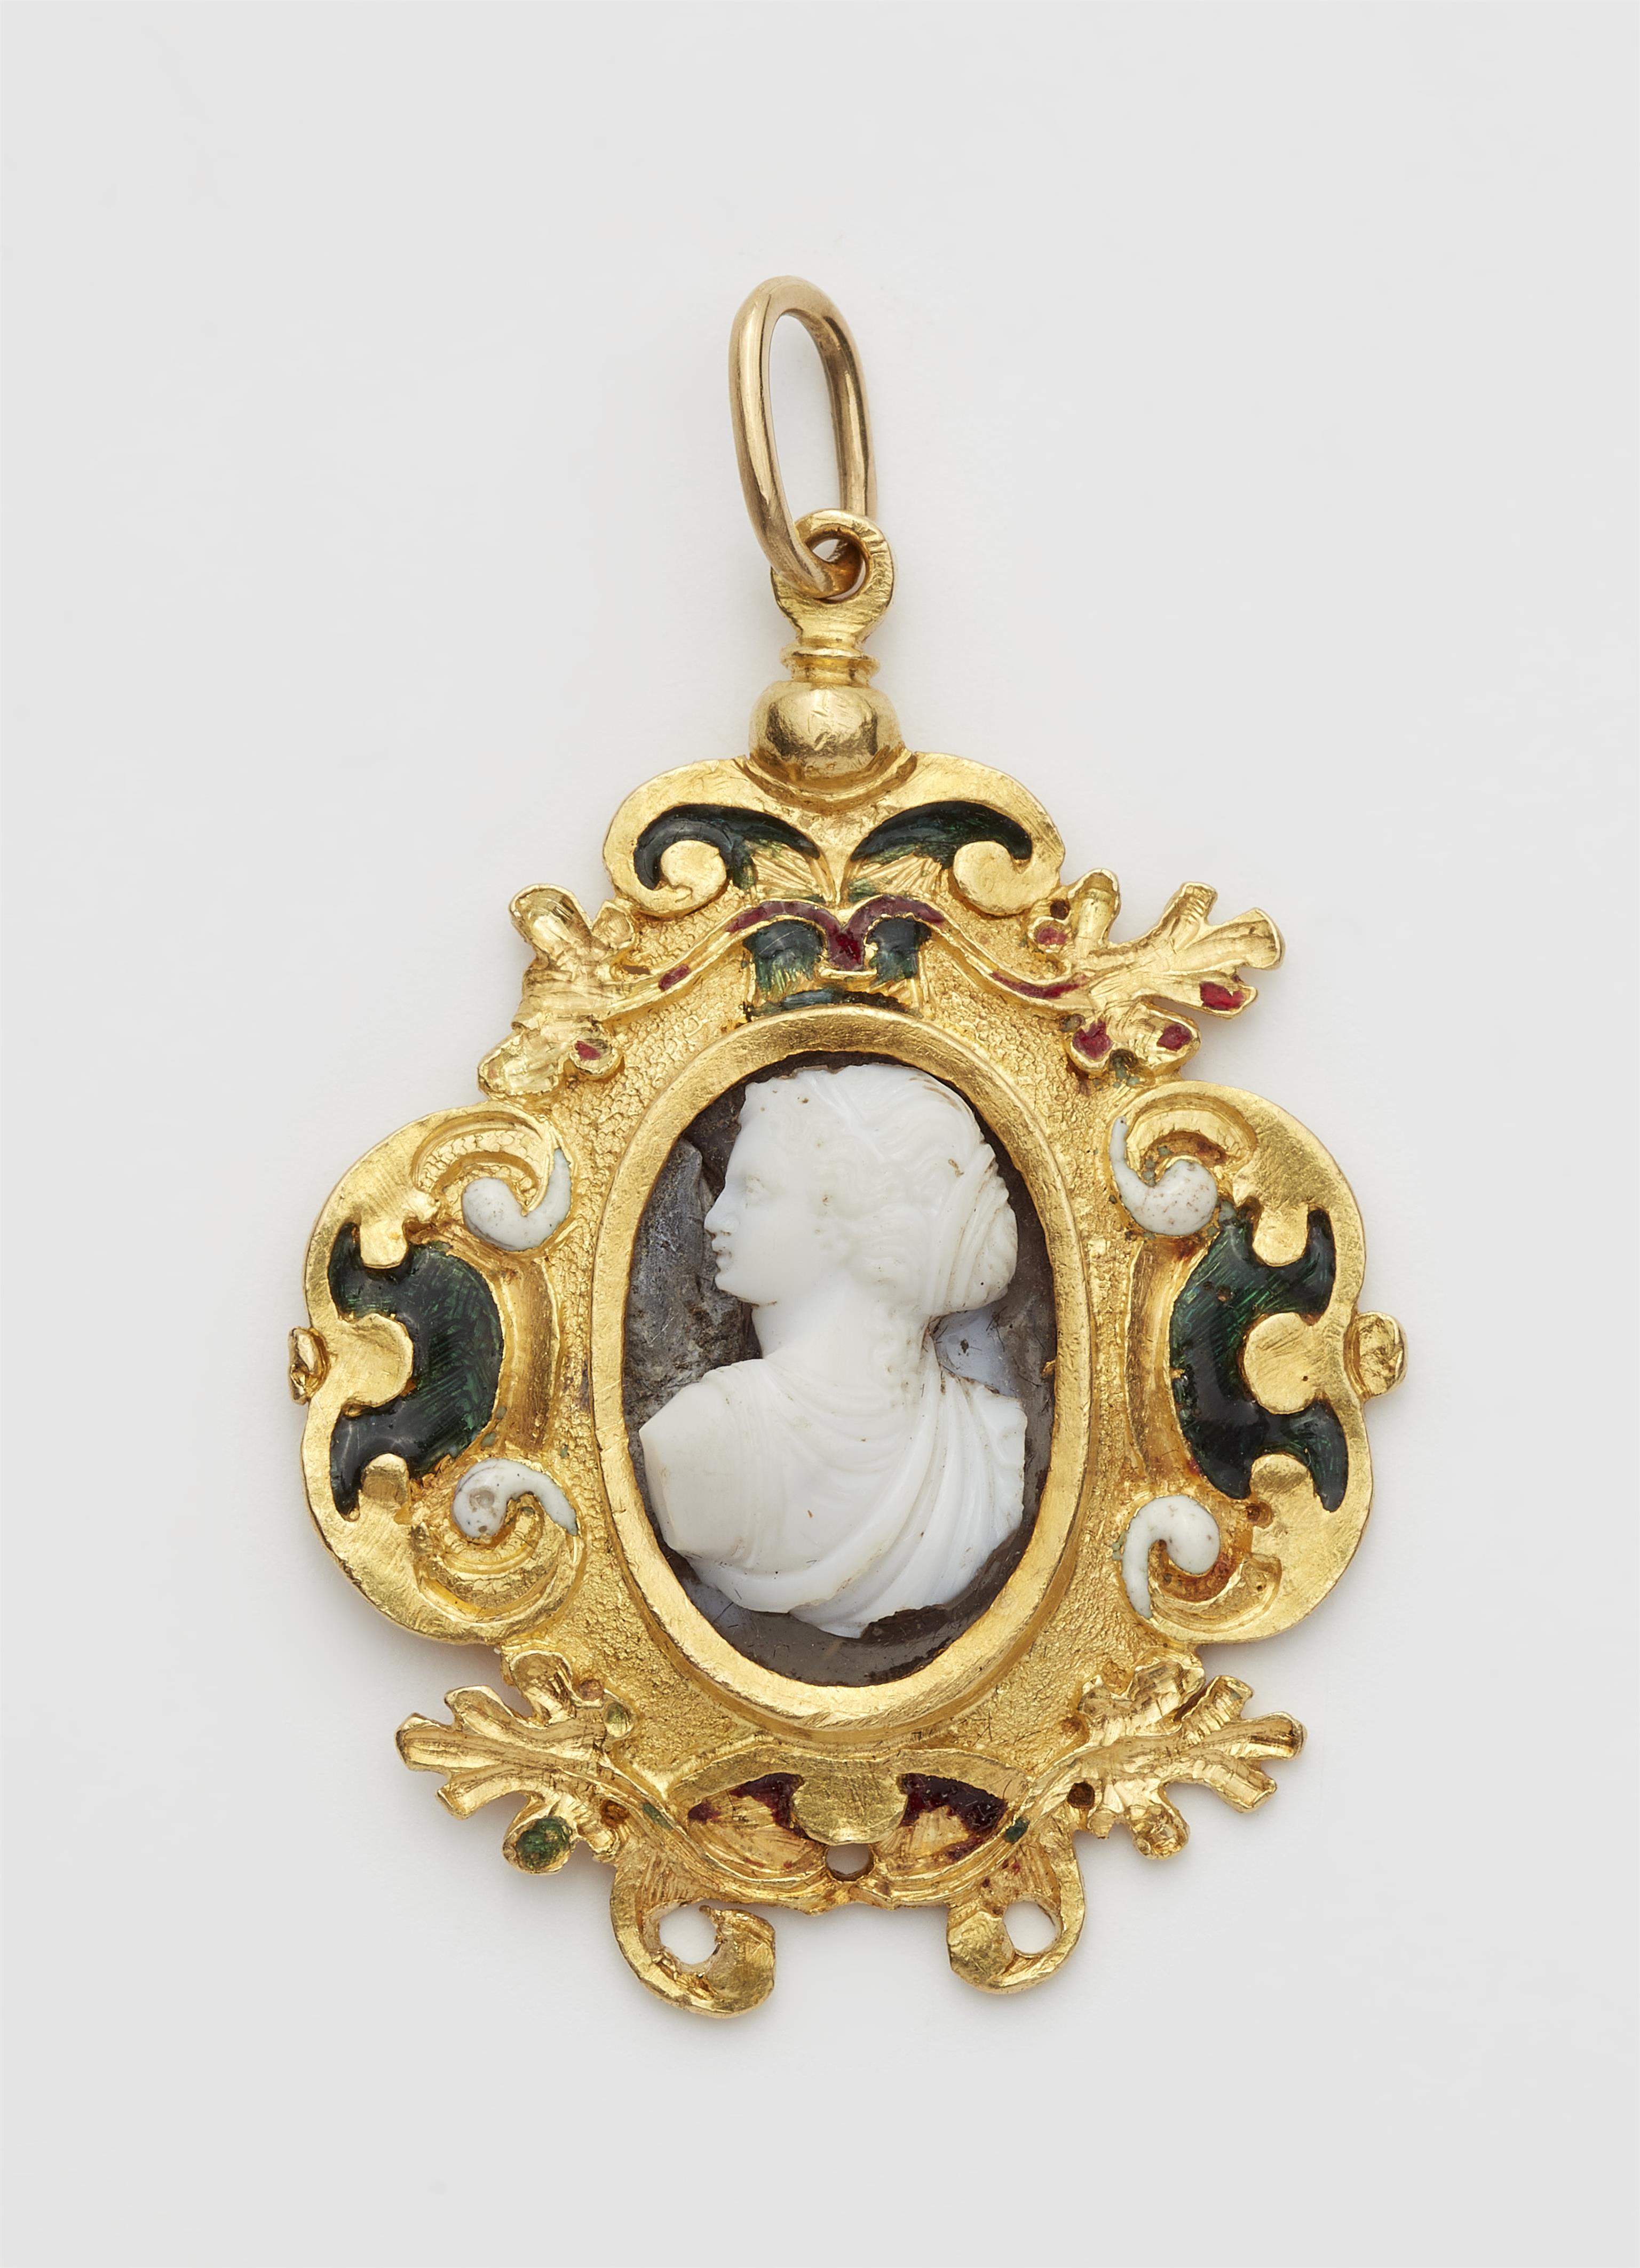 An 18k gold and enamel cartouche frame pendant with a probably Italian 
Renaissance layered chalcedony cameo depicting a lady‘s bust in the style 
of Hellenistic empresses. - image-1